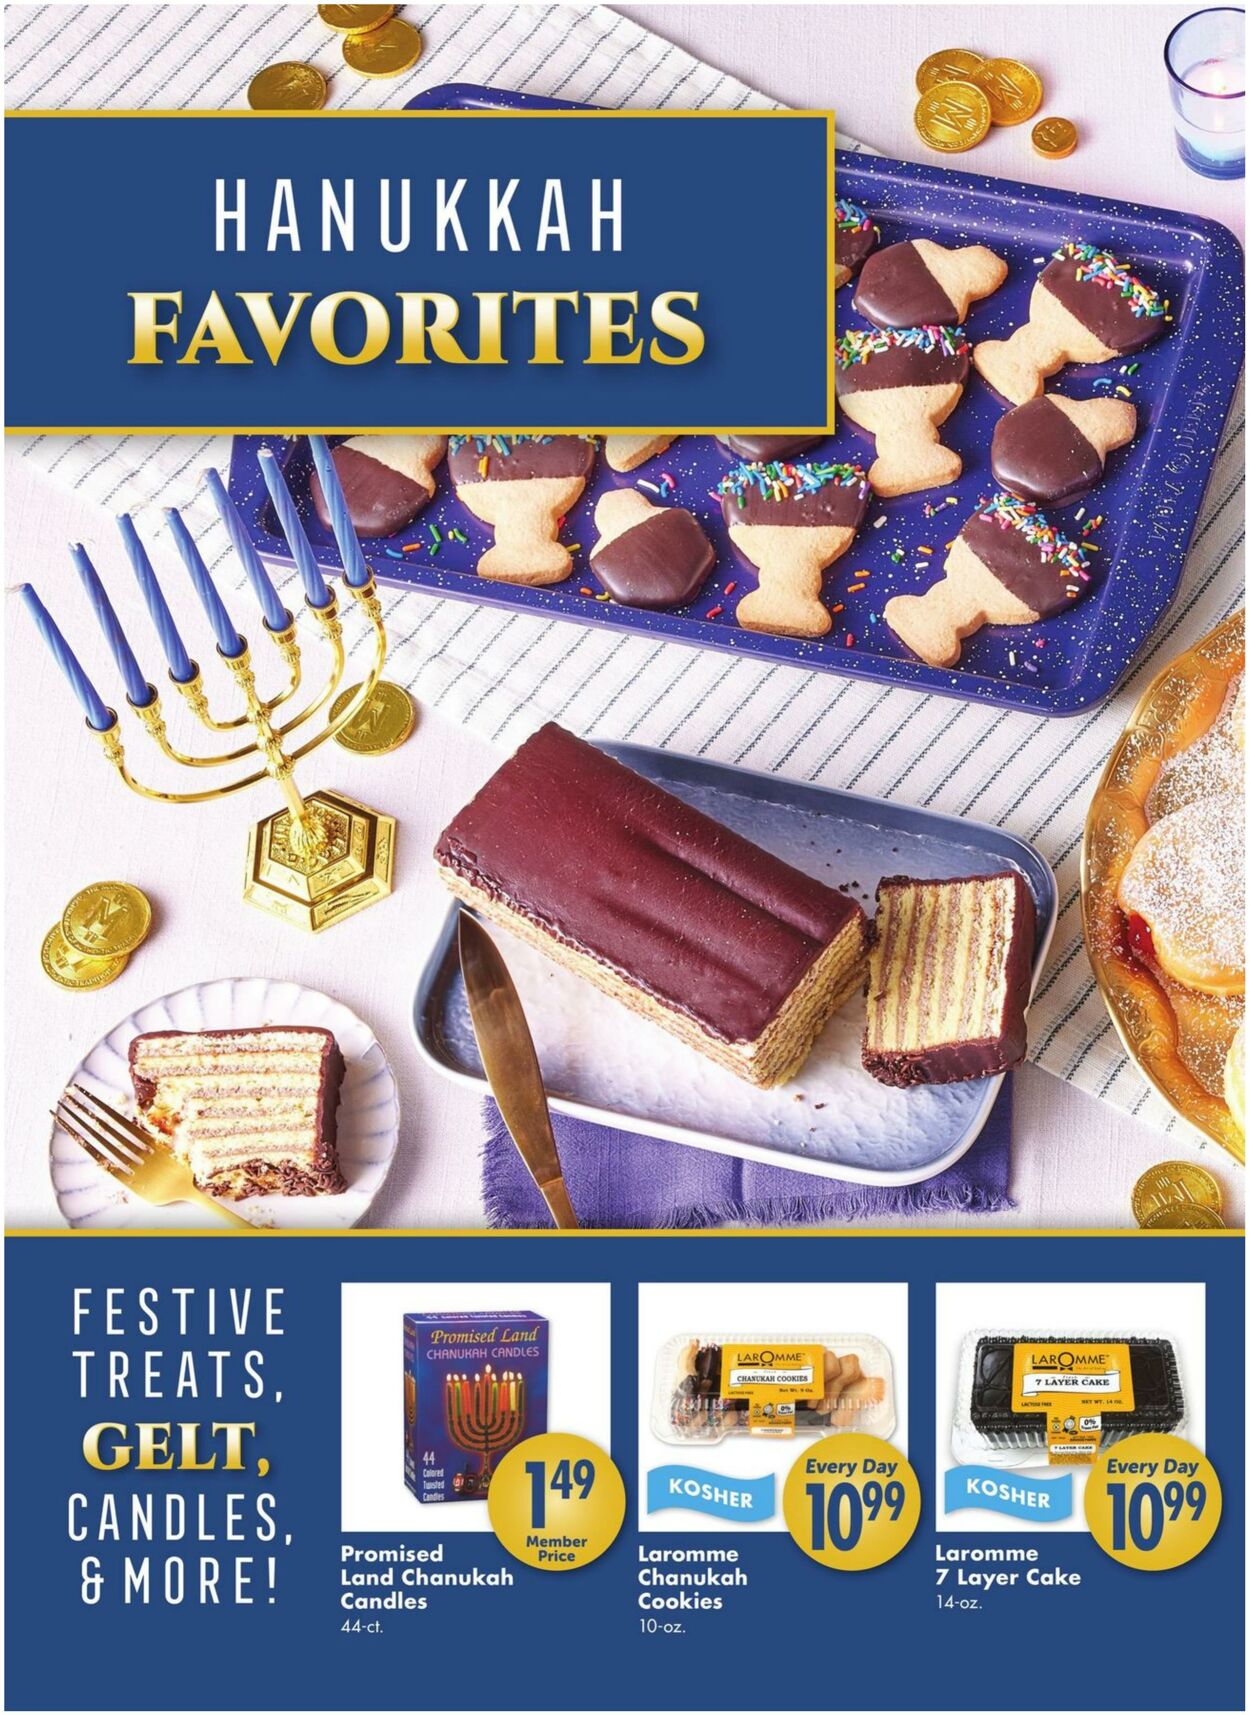 Catalogue Safeway from 11/29/2023